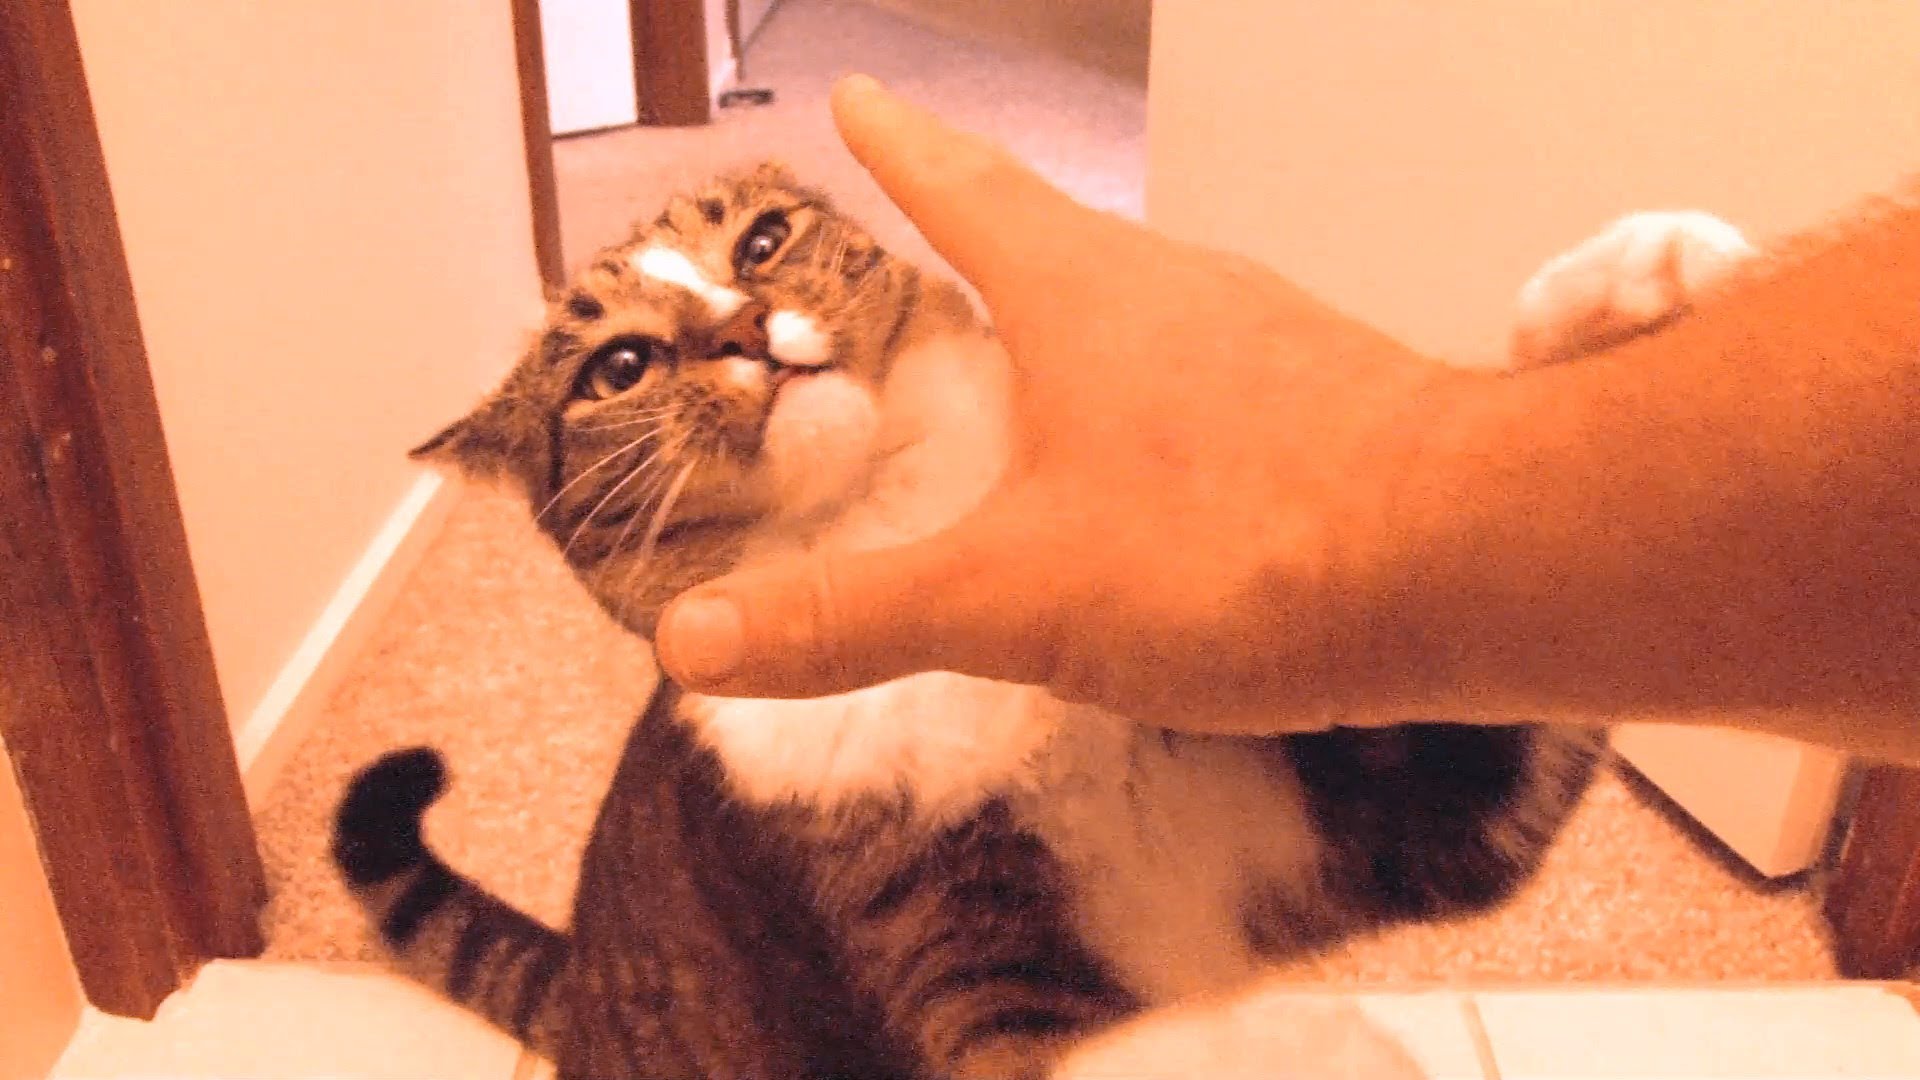 Kitty goes for the hand